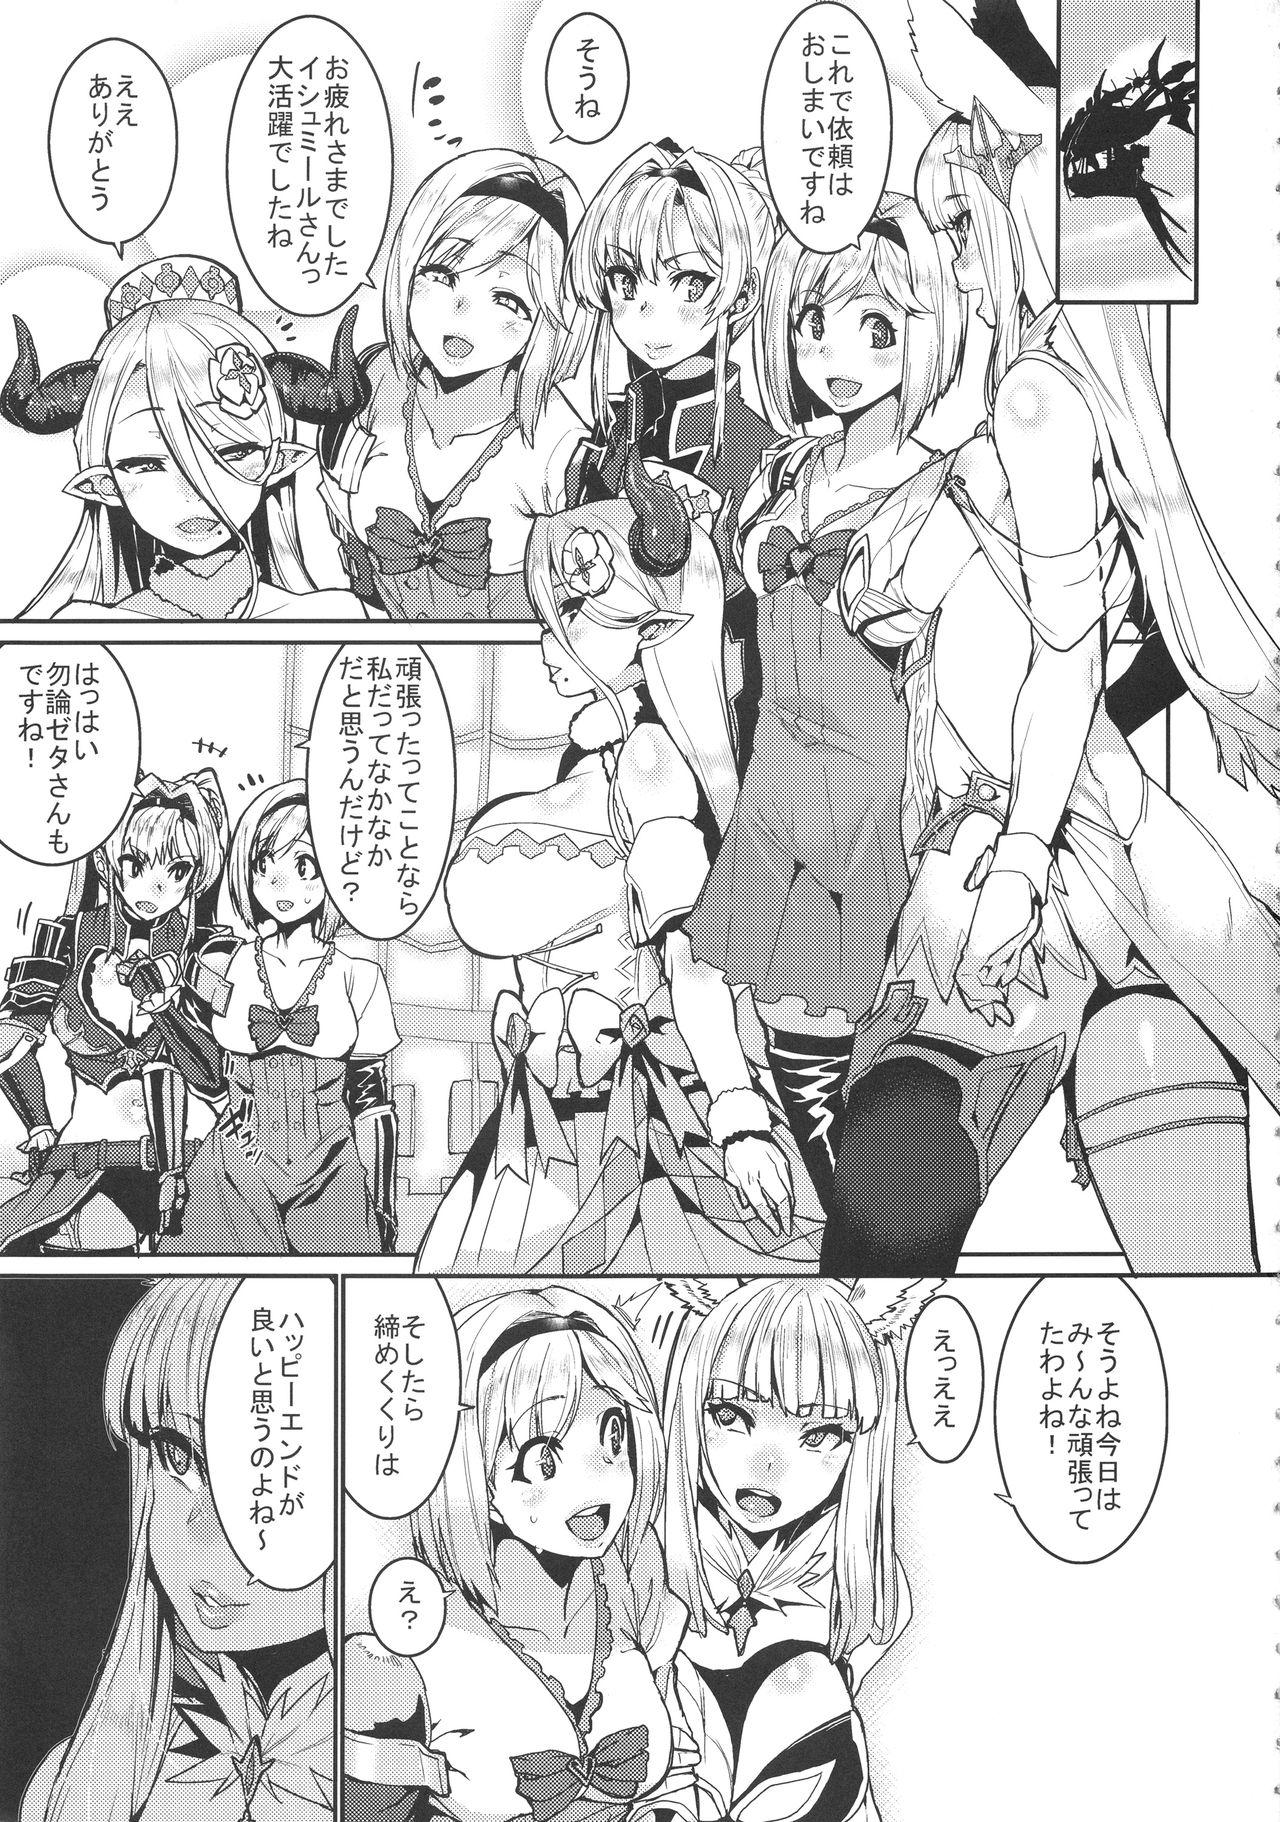 Scandal Be covered, be smeared - Granblue fantasy Cams - Page 5